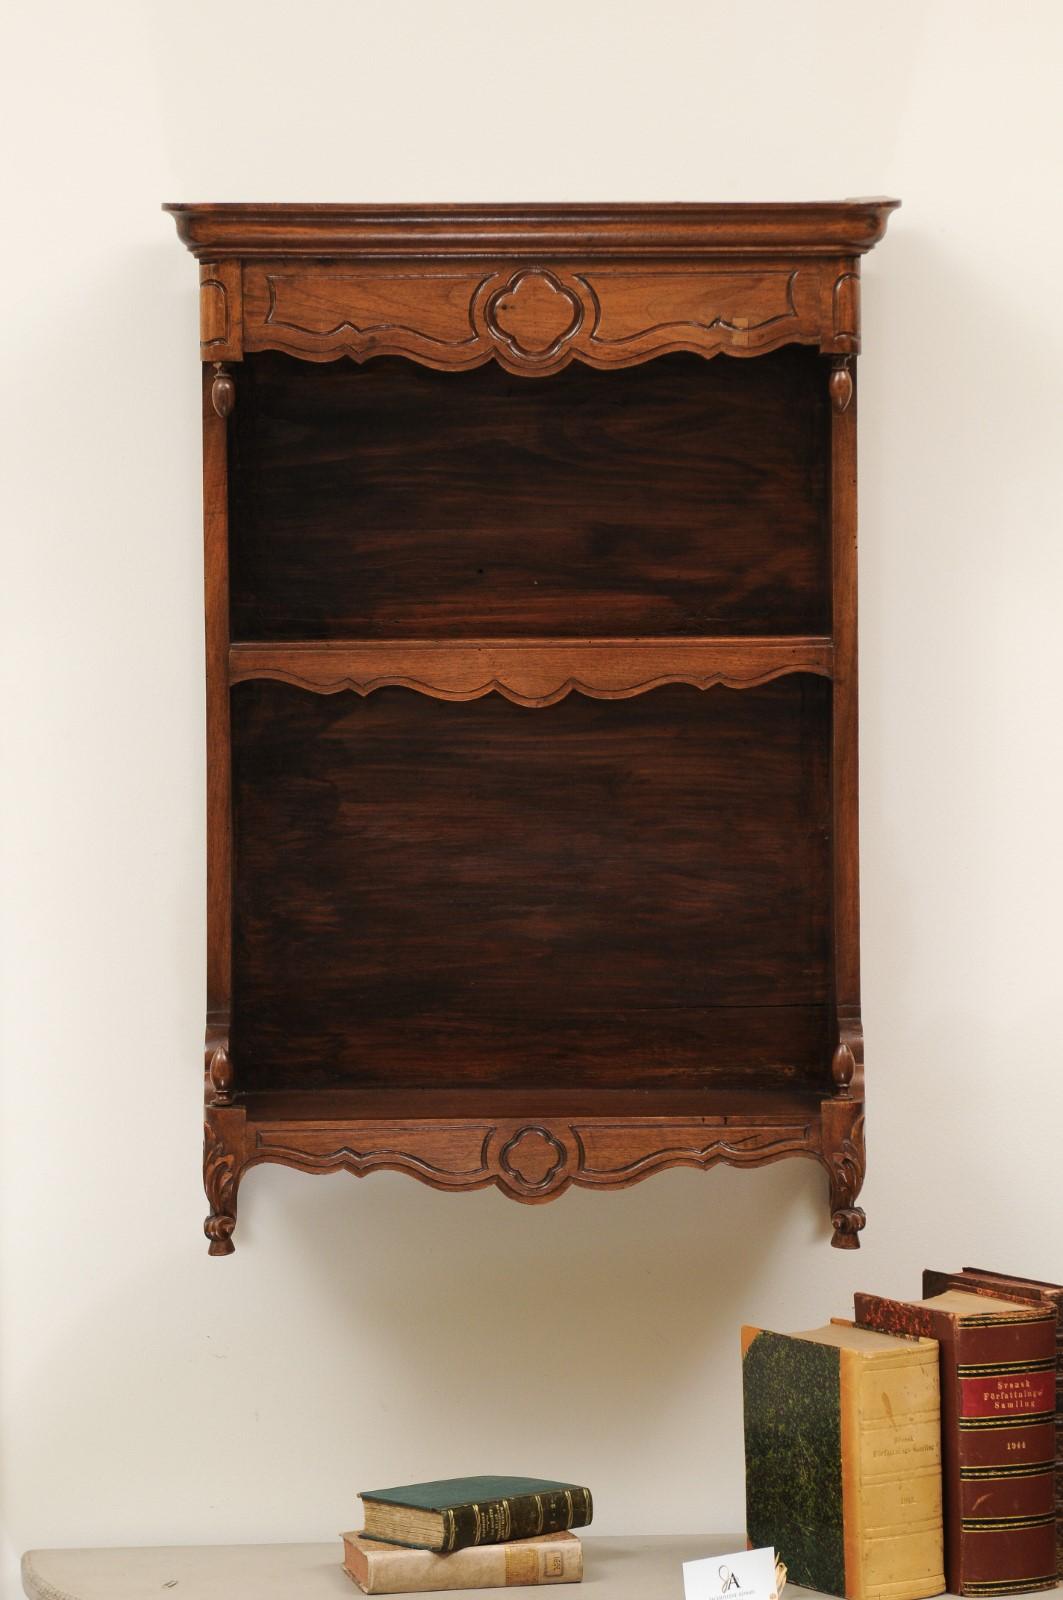 A French Louis XV style late 19th century walnut rack from Provence with carved motifs and scrolling feet. Created in Southern France during the last quarter of the 19th century, this Provençal walnut wall rack features a molded cornice resting on a